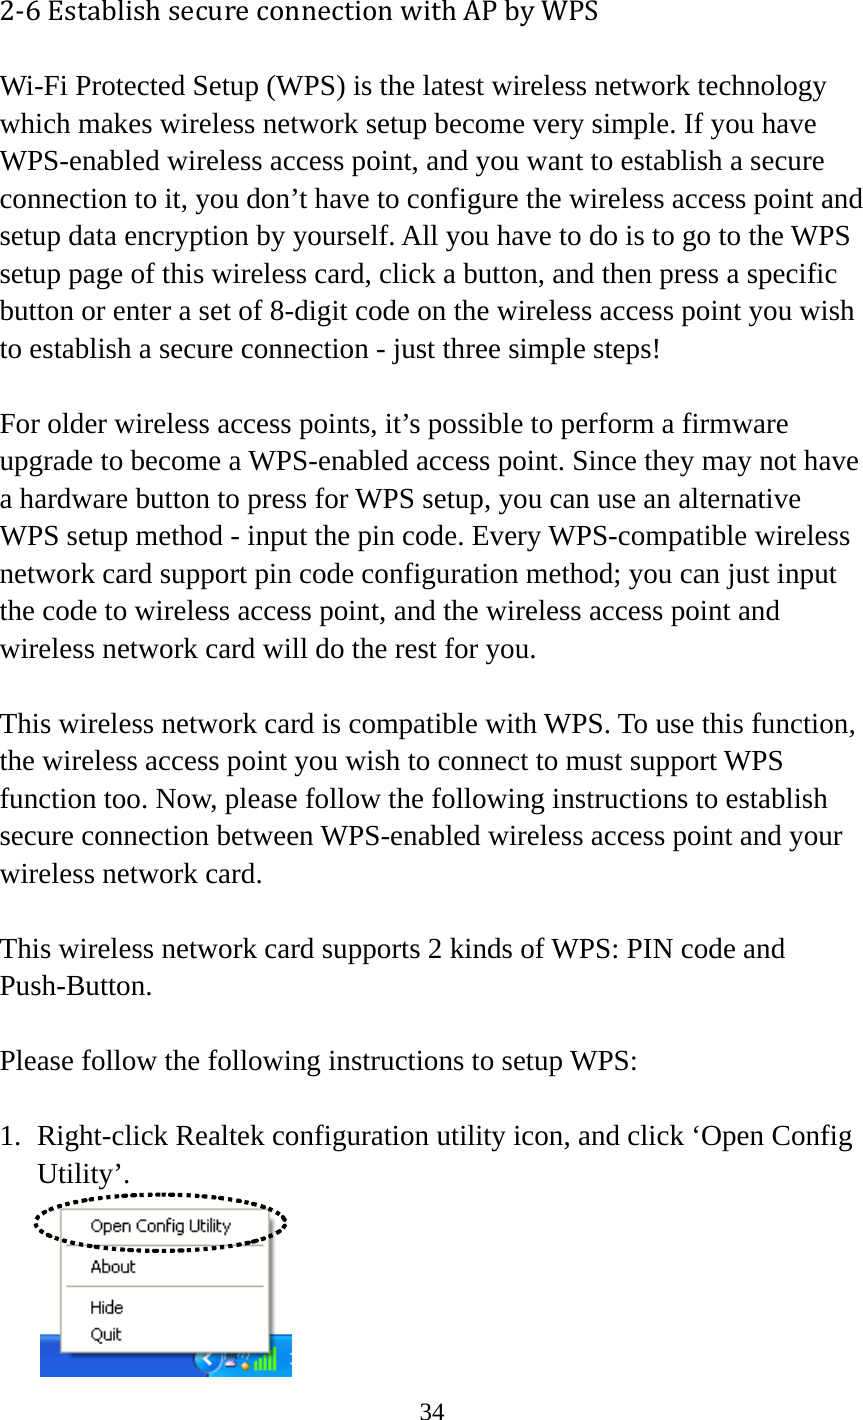 34  2‐6EstablishsecureconnectionwithAPbyWPSWi-Fi Protected Setup (WPS) is the latest wireless network technology which makes wireless network setup become very simple. If you have WPS-enabled wireless access point, and you want to establish a secure connection to it, you don’t have to configure the wireless access point and setup data encryption by yourself. All you have to do is to go to the WPS setup page of this wireless card, click a button, and then press a specific button or enter a set of 8-digit code on the wireless access point you wish to establish a secure connection - just three simple steps!    For older wireless access points, it’s possible to perform a firmware upgrade to become a WPS-enabled access point. Since they may not have a hardware button to press for WPS setup, you can use an alternative WPS setup method - input the pin code. Every WPS-compatible wireless network card support pin code configuration method; you can just input the code to wireless access point, and the wireless access point and wireless network card will do the rest for you.  This wireless network card is compatible with WPS. To use this function, the wireless access point you wish to connect to must support WPS function too. Now, please follow the following instructions to establish secure connection between WPS-enabled wireless access point and your wireless network card.  This wireless network card supports 2 kinds of WPS: PIN code and Push-Button.   Please follow the following instructions to setup WPS:  1. Right-click Realtek configuration utility icon, and click ‘Open Config Utility’.  